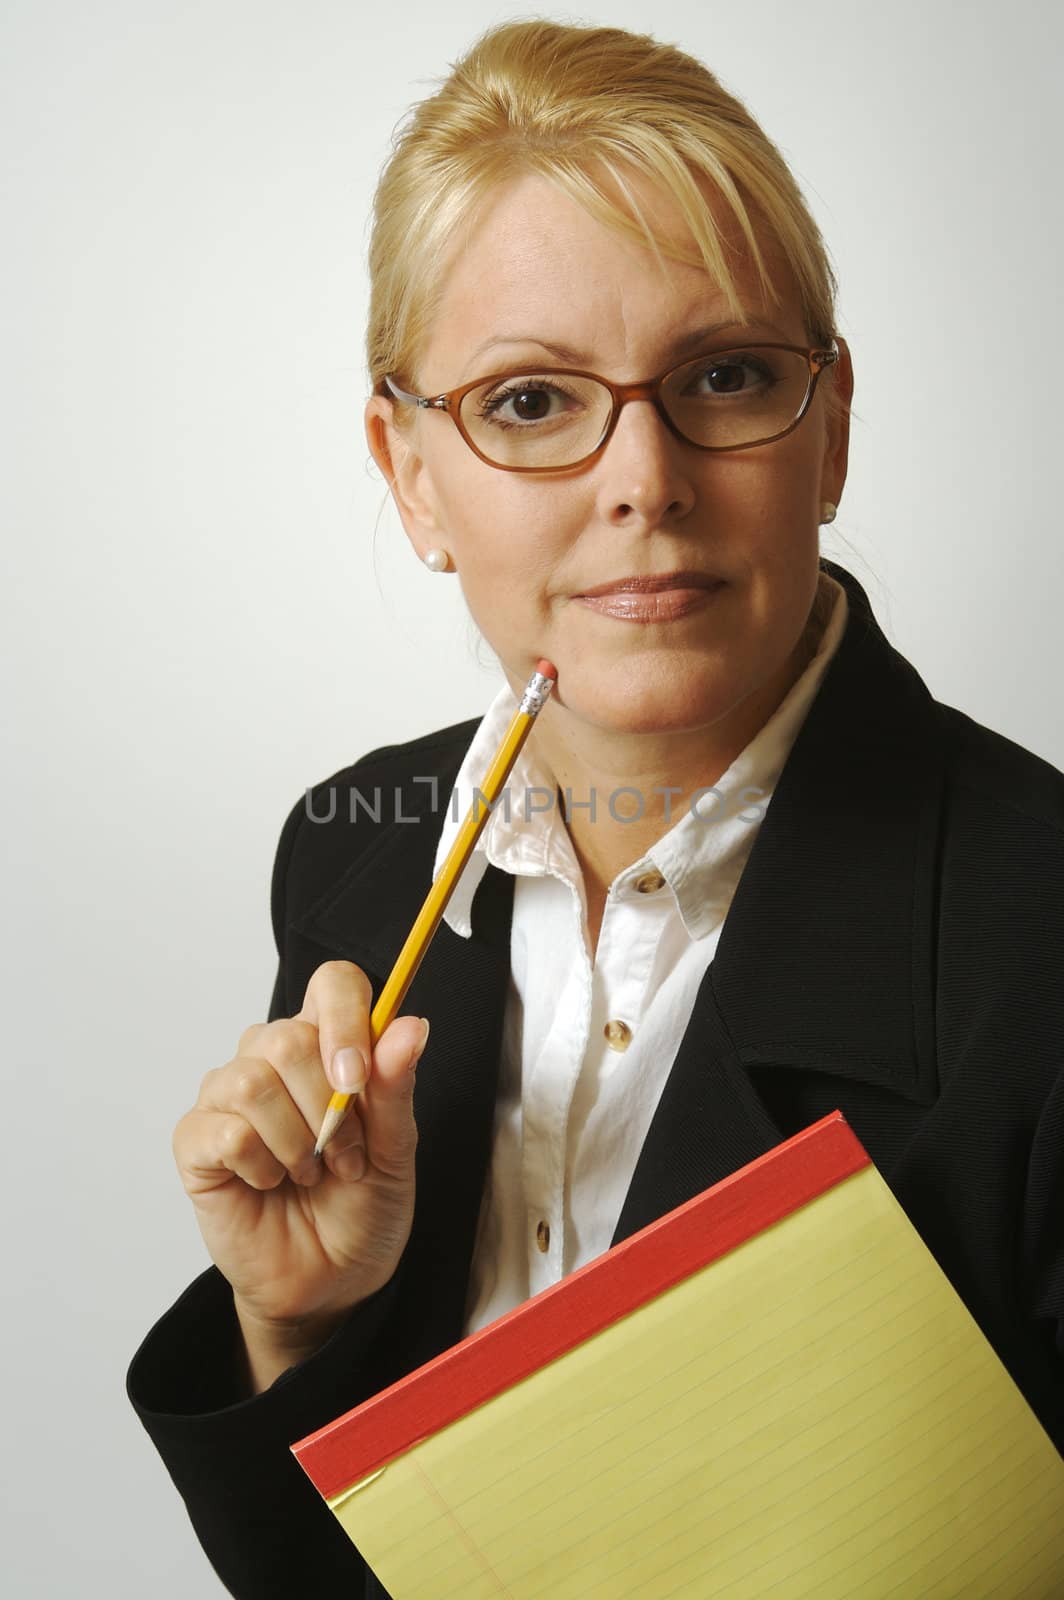 Beautiful Woman Thinks with Pencil & Notepad on a White Background.
